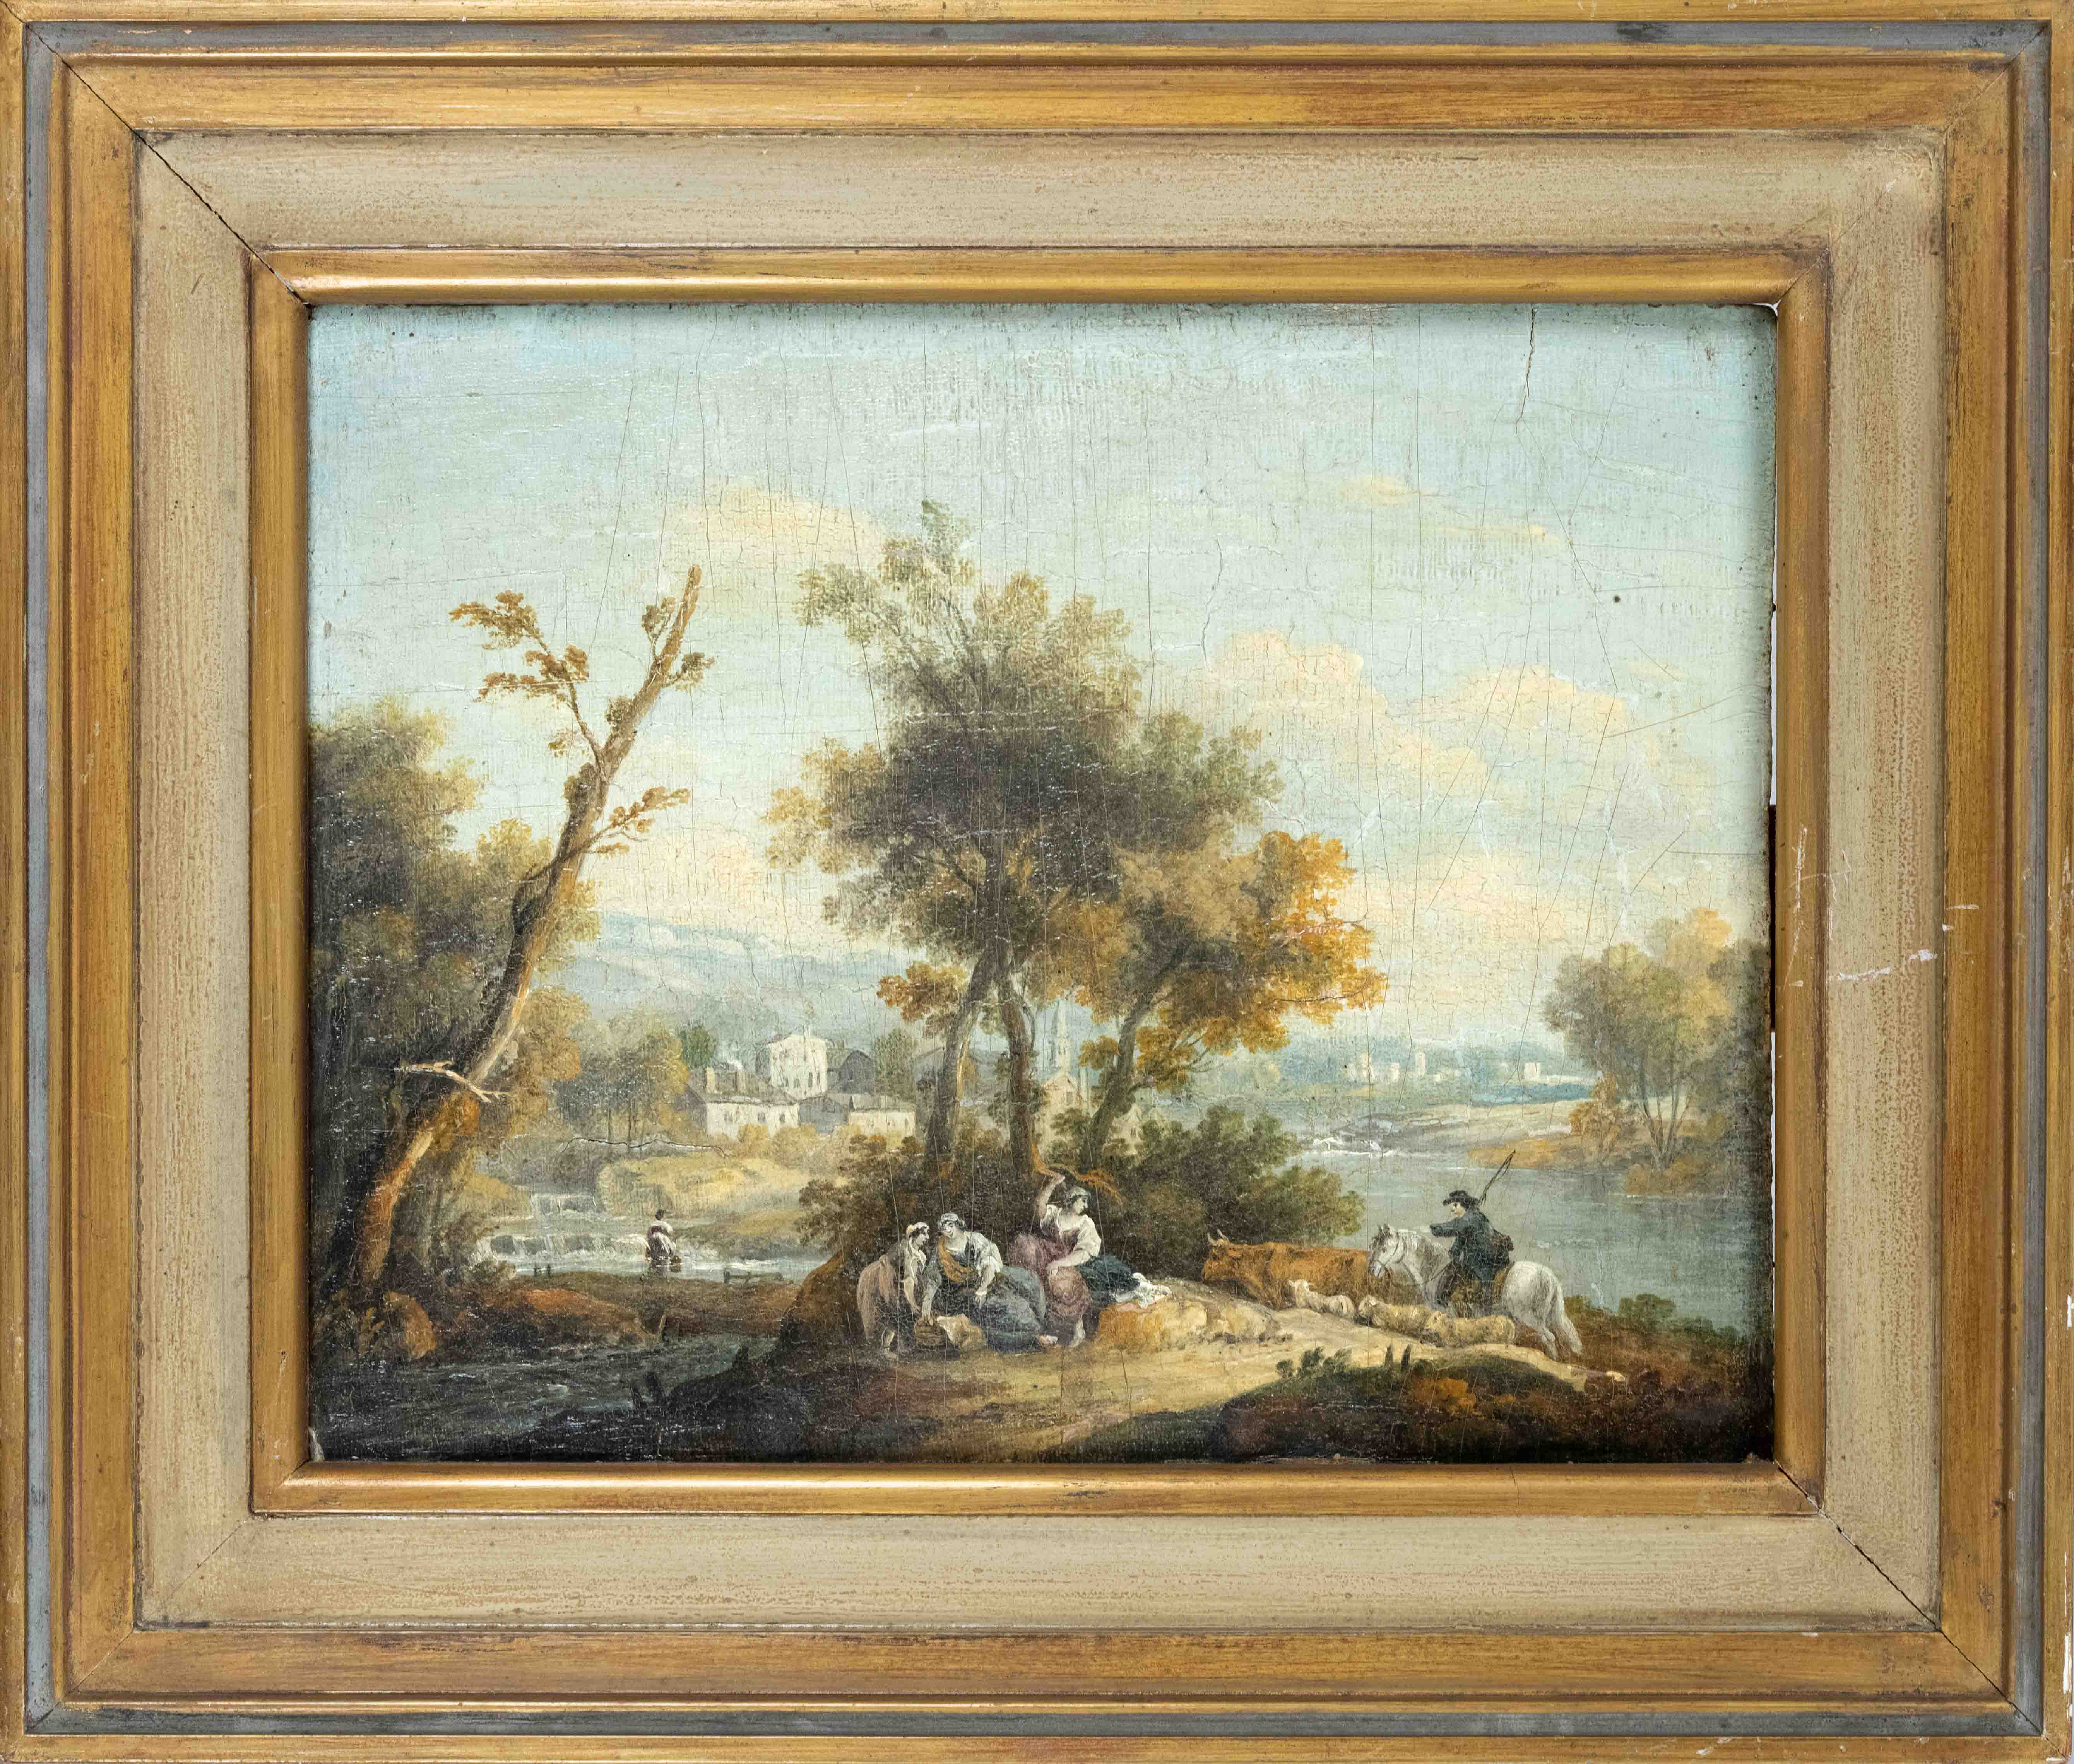 Anonymous lambskin painter of the probably 19th century in the style of the 17th/18th century,